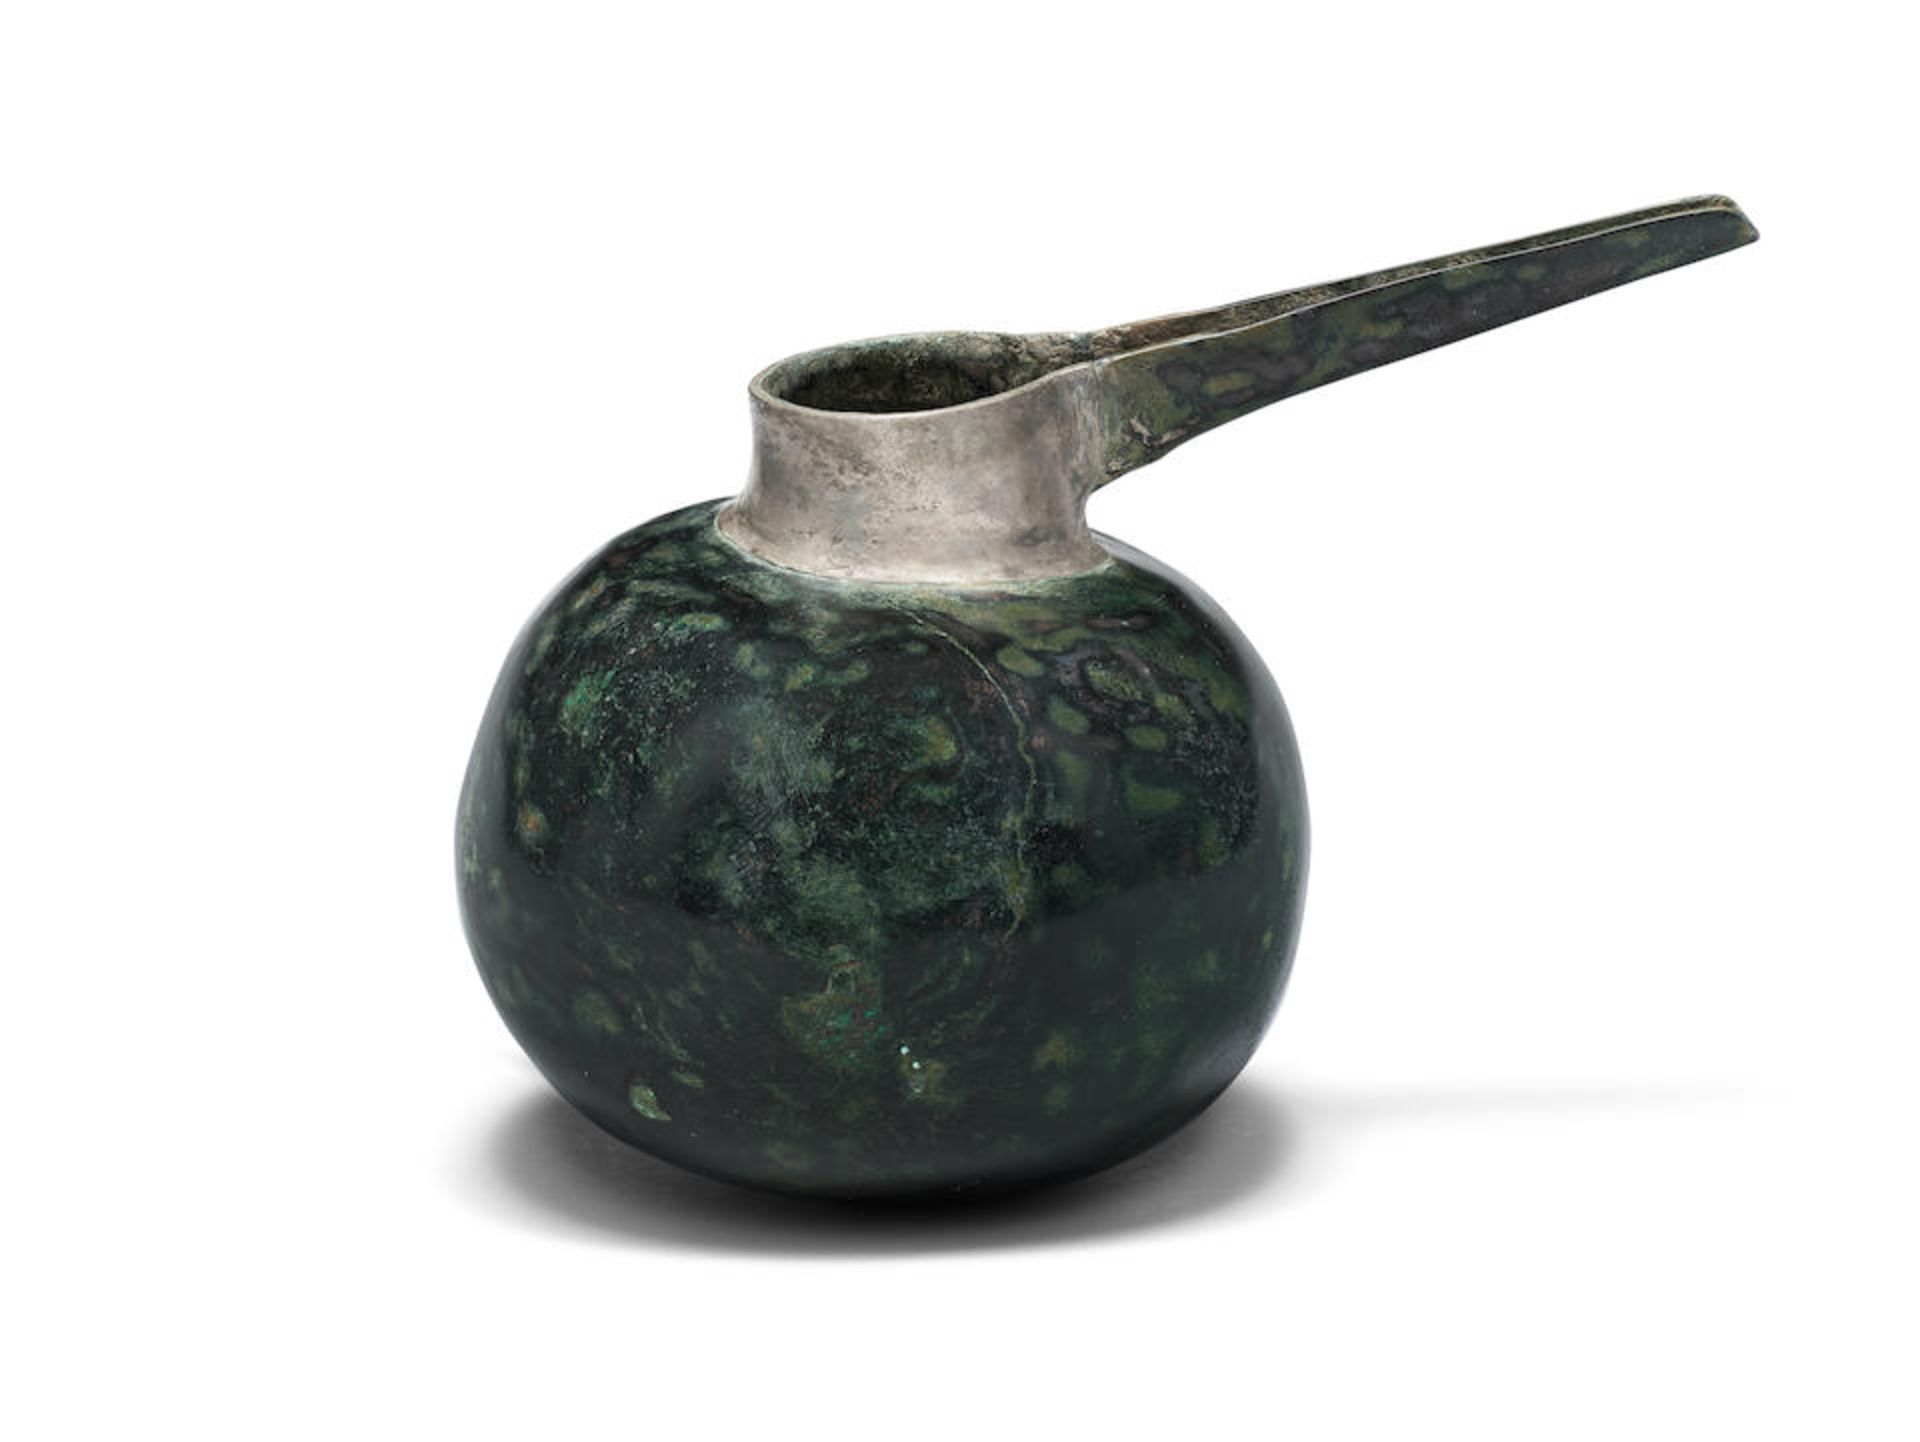 An Elamite bronze and silver spouted vessel